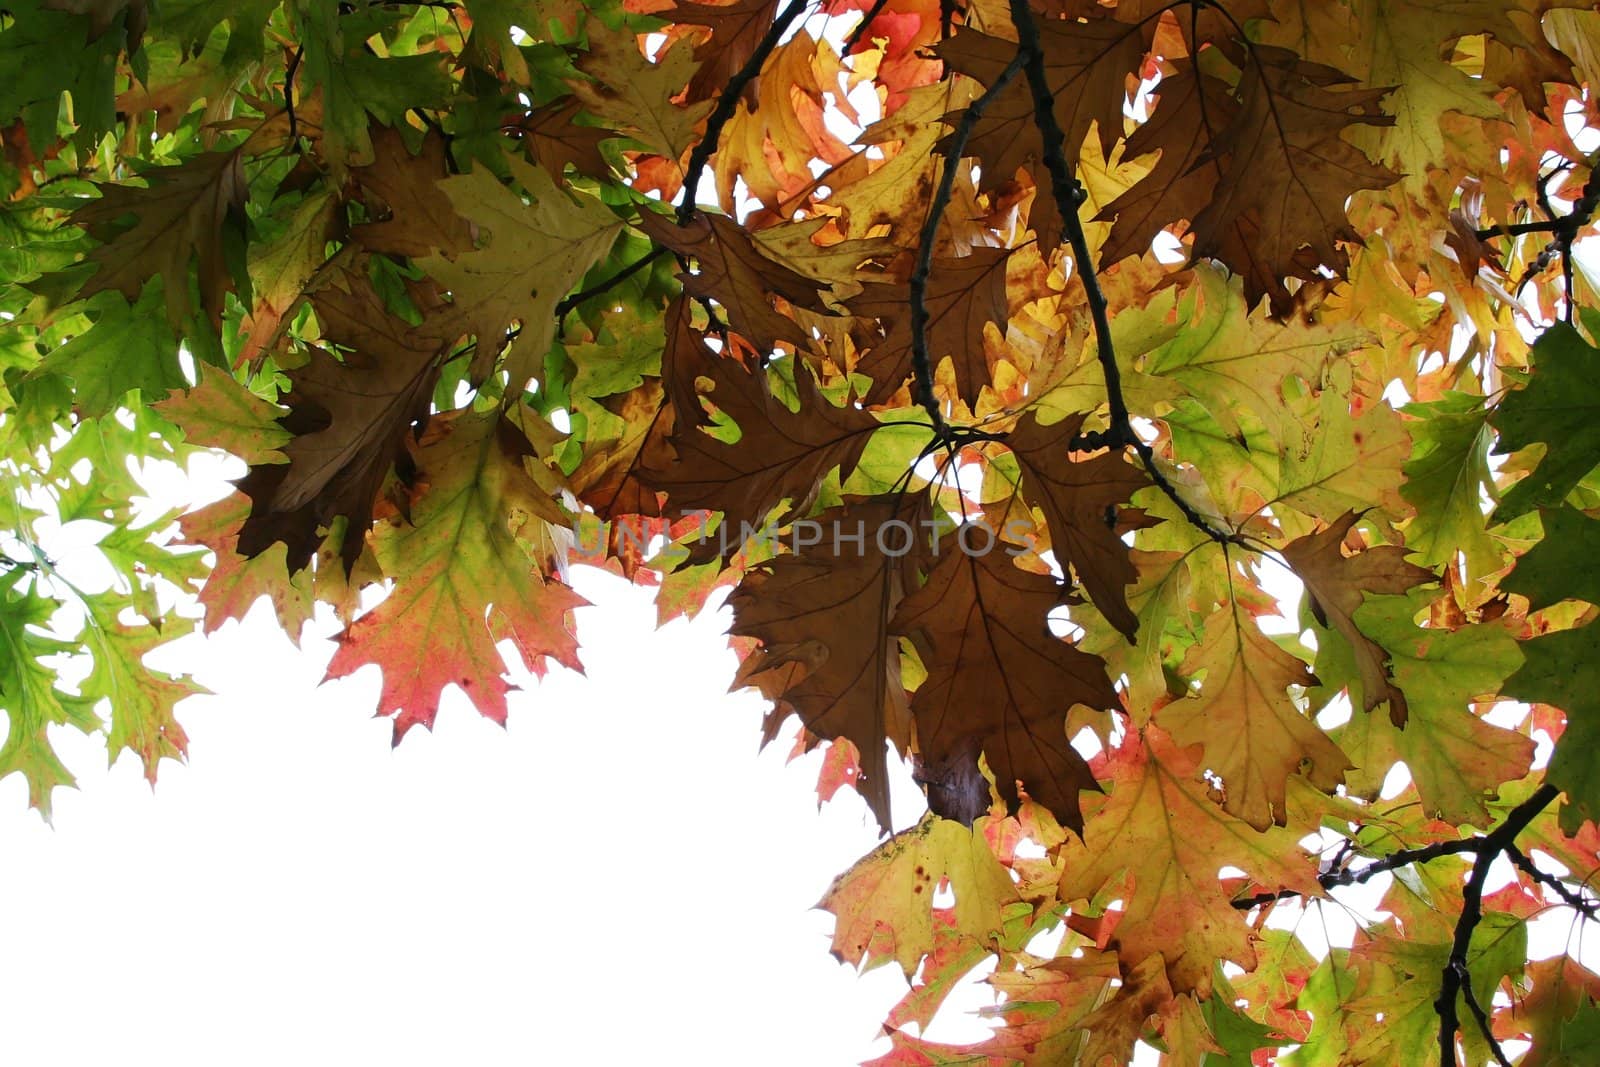 Autumn leaves on the tree - against the white sky